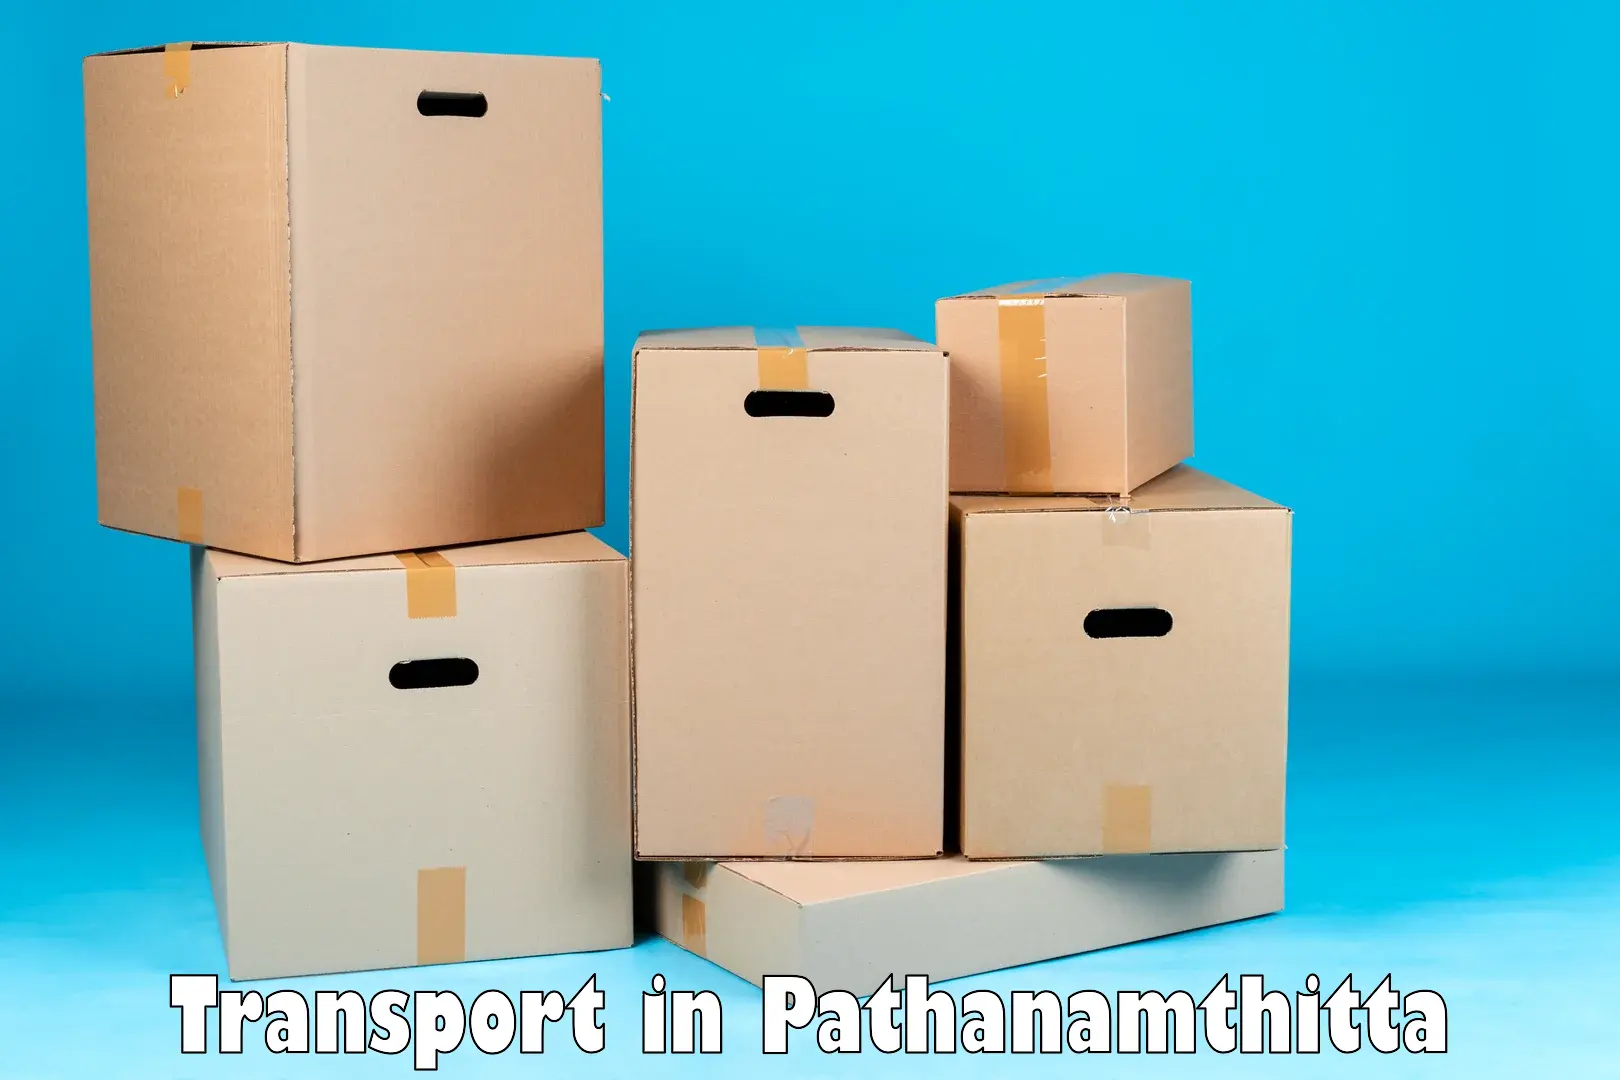 Daily transport service in Pathanamthitta